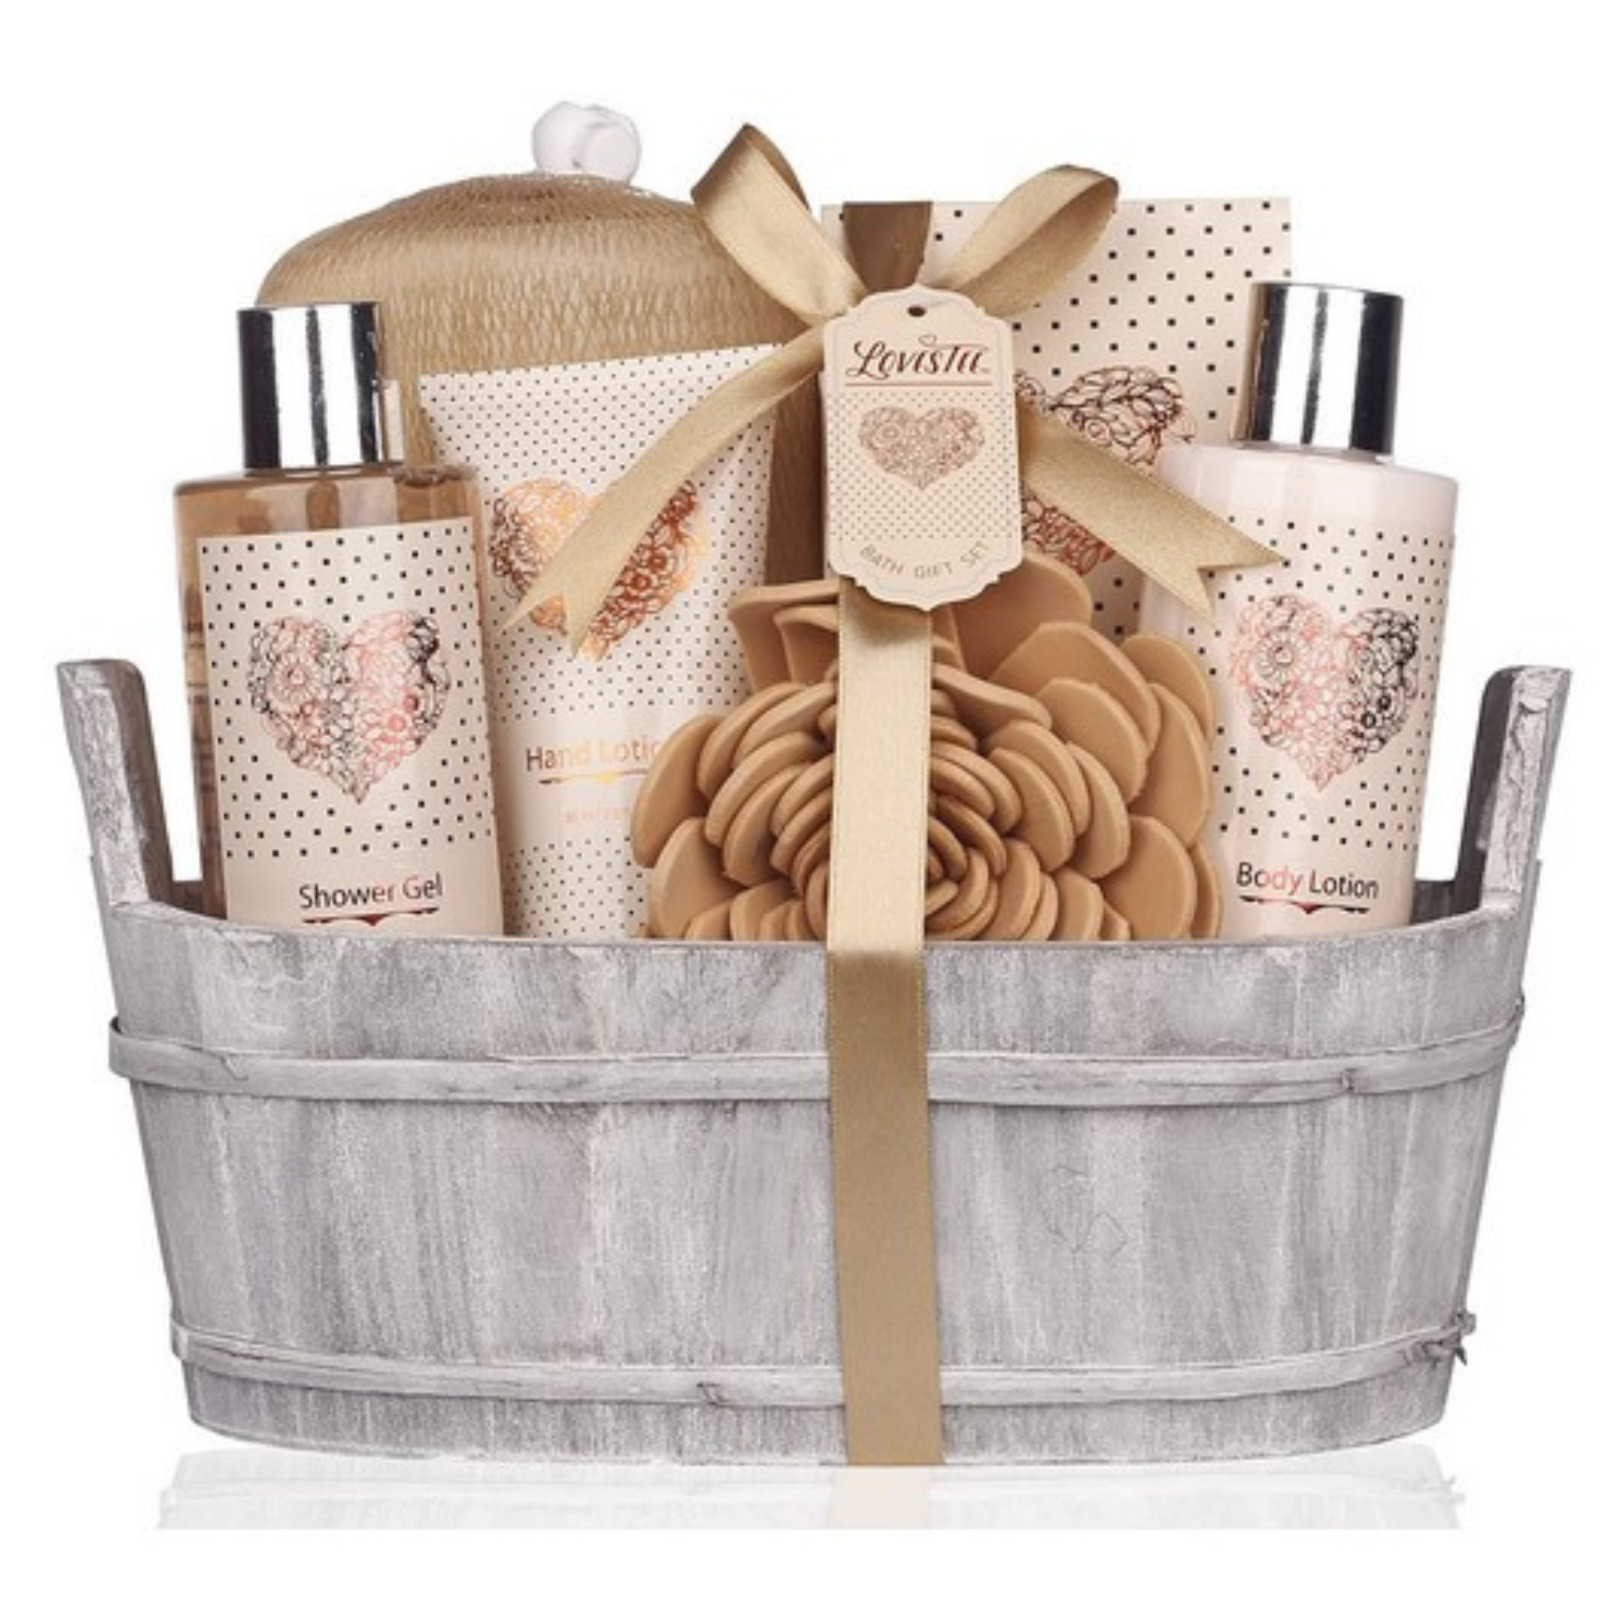 Mother's Day Spa Gift Basket – Bath and Body Set with Vanilla Fragrance for her